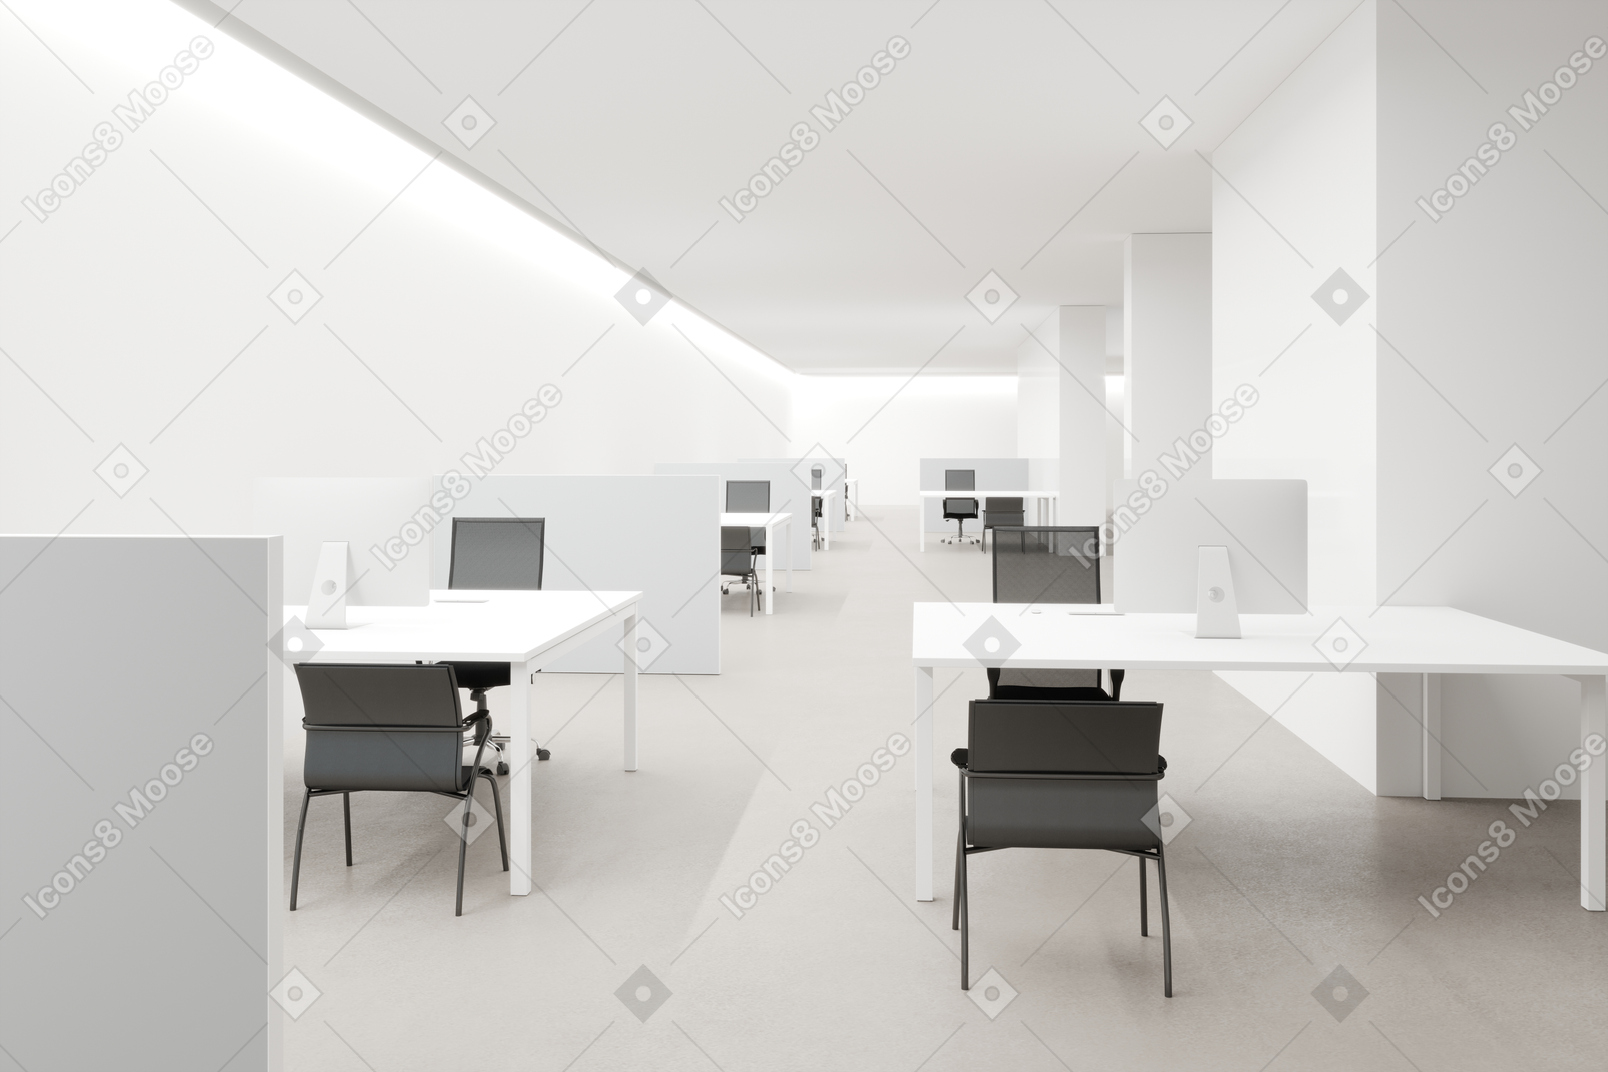 Workplace with white walls, desks and office chairs